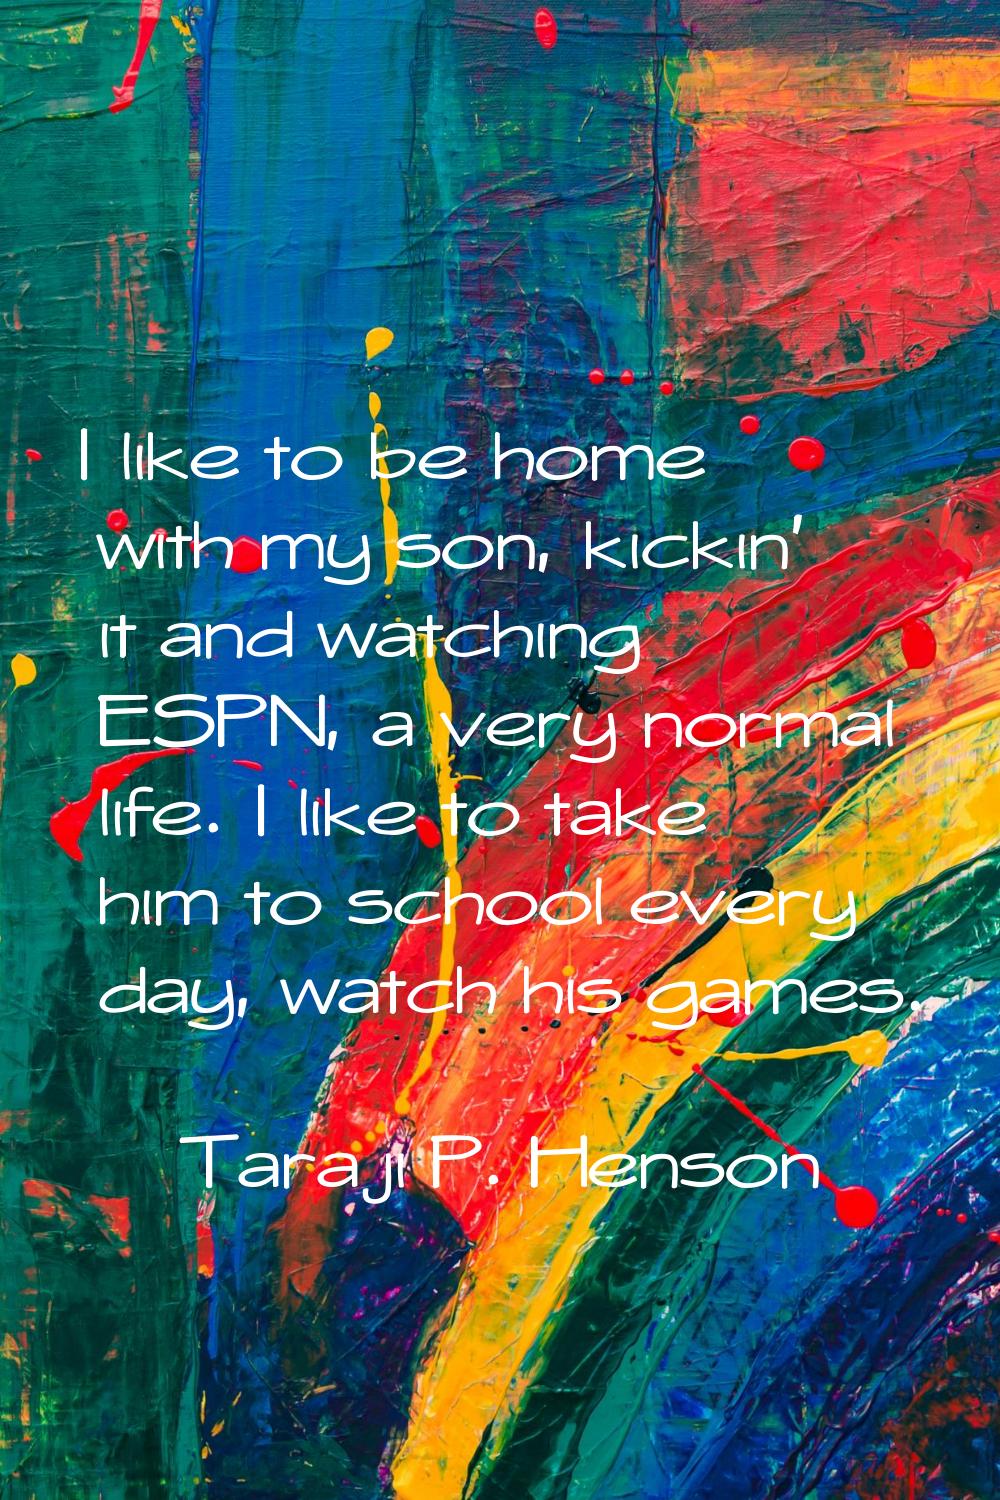 I like to be home with my son, kickin' it and watching ESPN, a very normal life. I like to take him